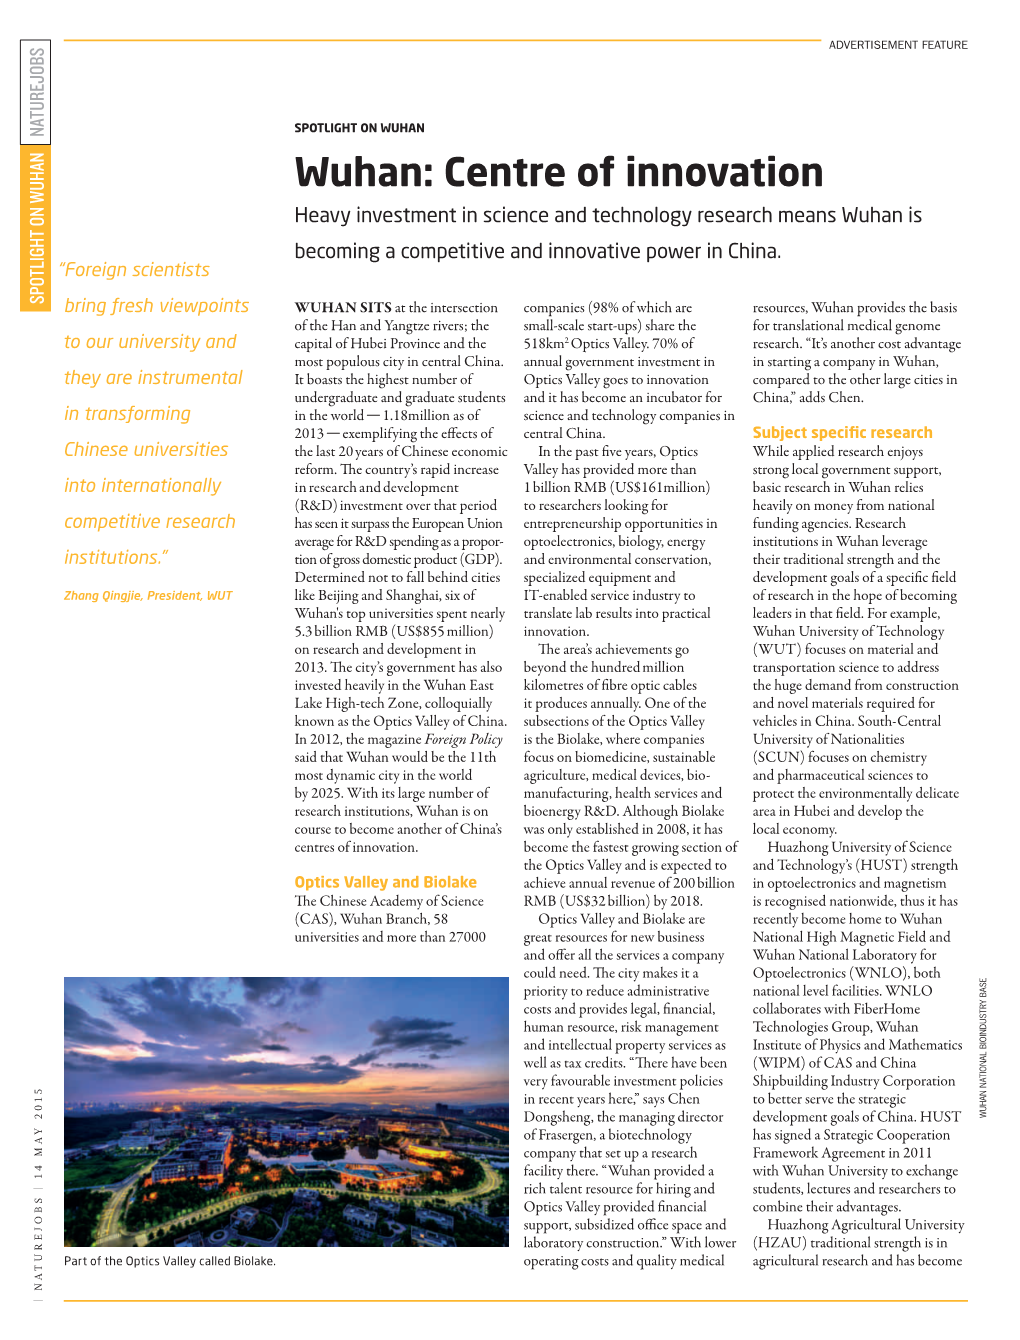 Wuhan: Centre of Innovation SPOTLIGHT ONWUHAN in 2012,The Magazine Known the As Optics Valley Ofchina